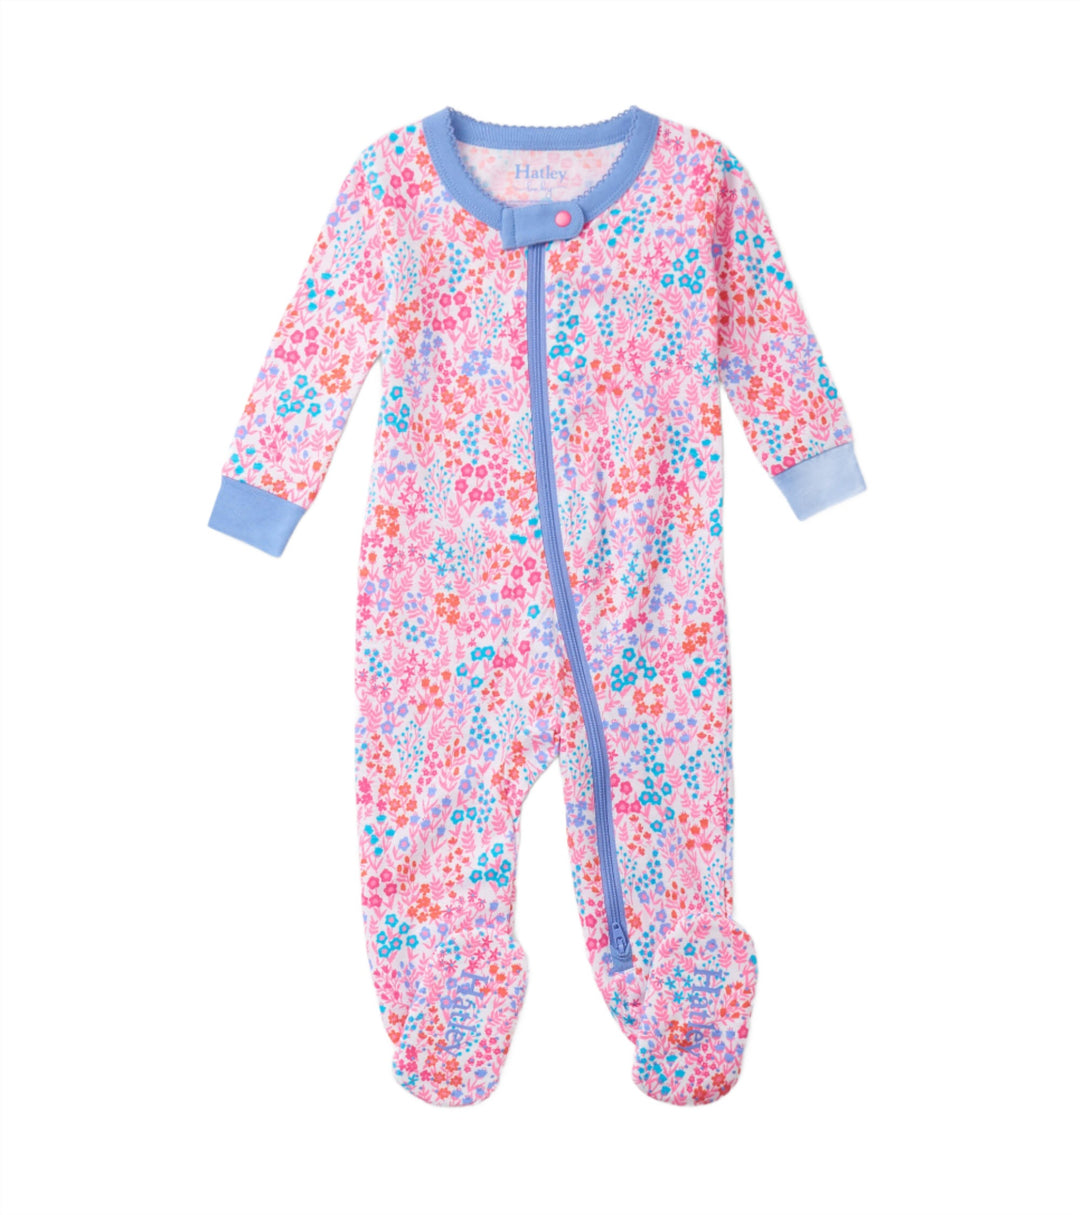 Hatley Footed Coverall (Ditsy Floral)